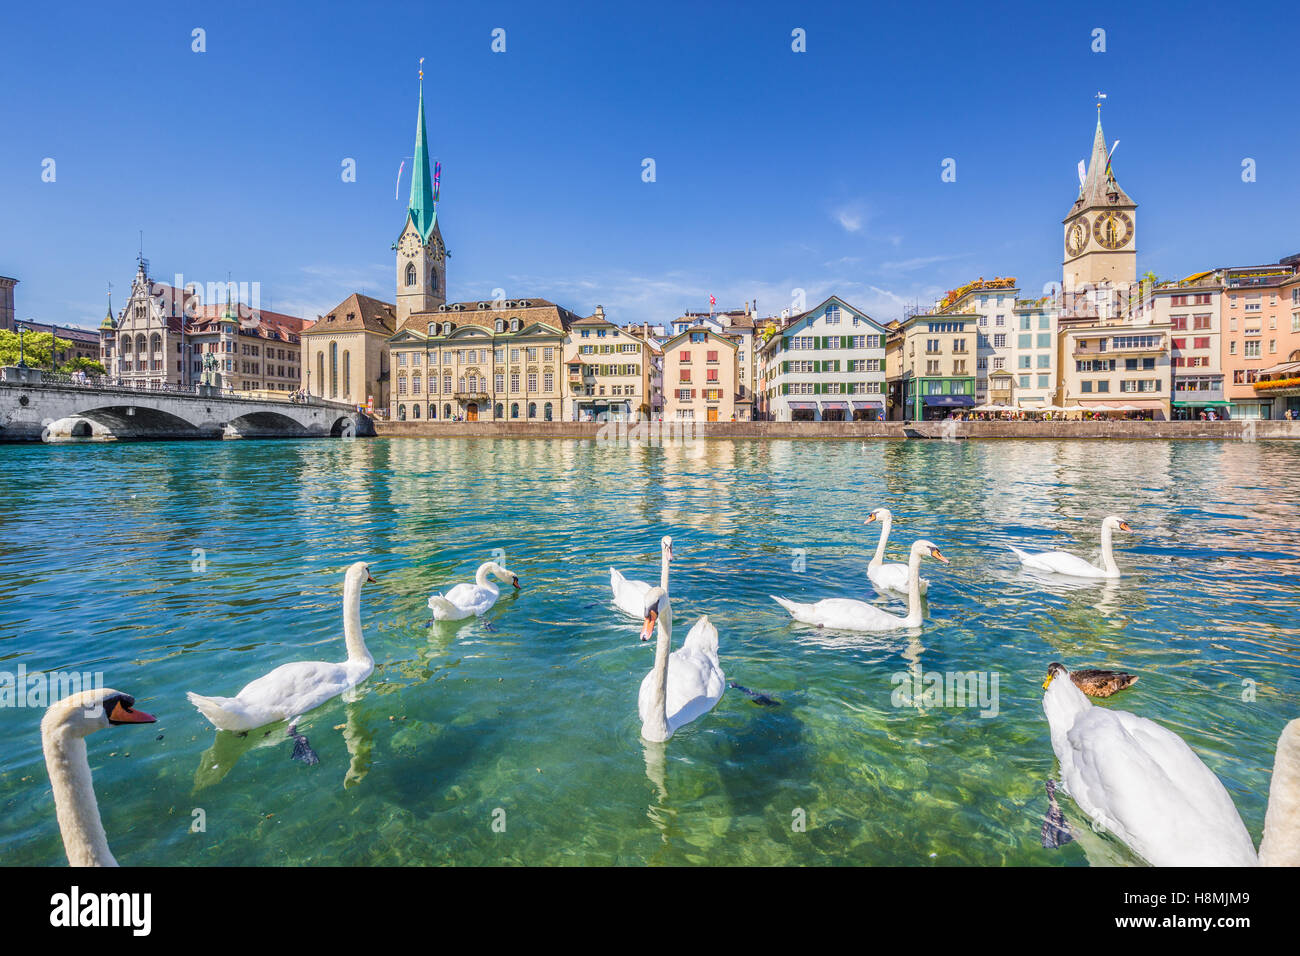 Historic city center of Zurich with famous Fraumunster Church and swans on river Limmat, Canton of Zurich, Switzerland Stock Photo